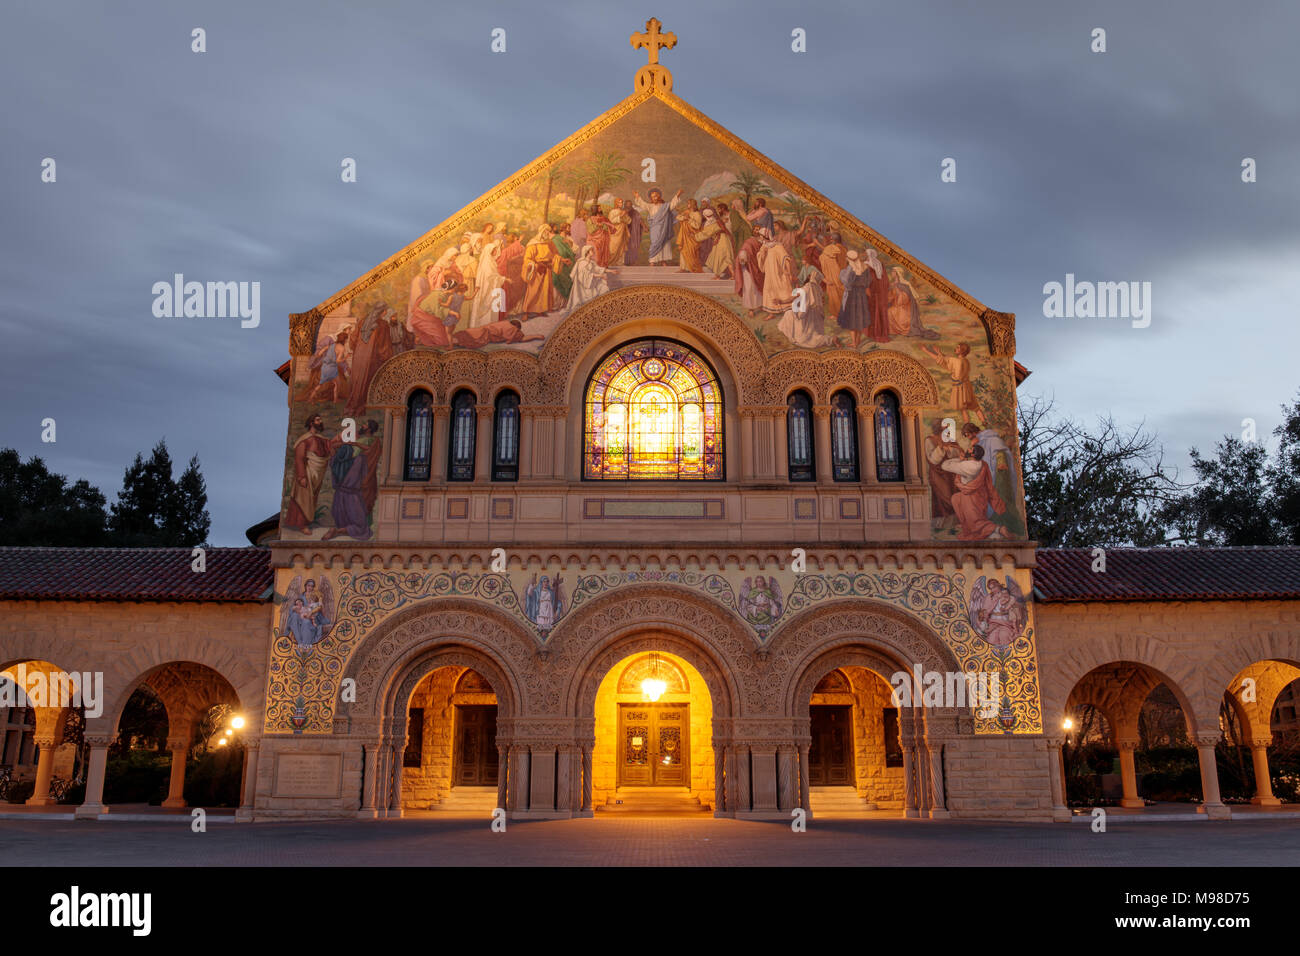 Stanford, California - March 19, 2018: North facade of the Stanford Memorial Church from the Main Quad Stock Photo